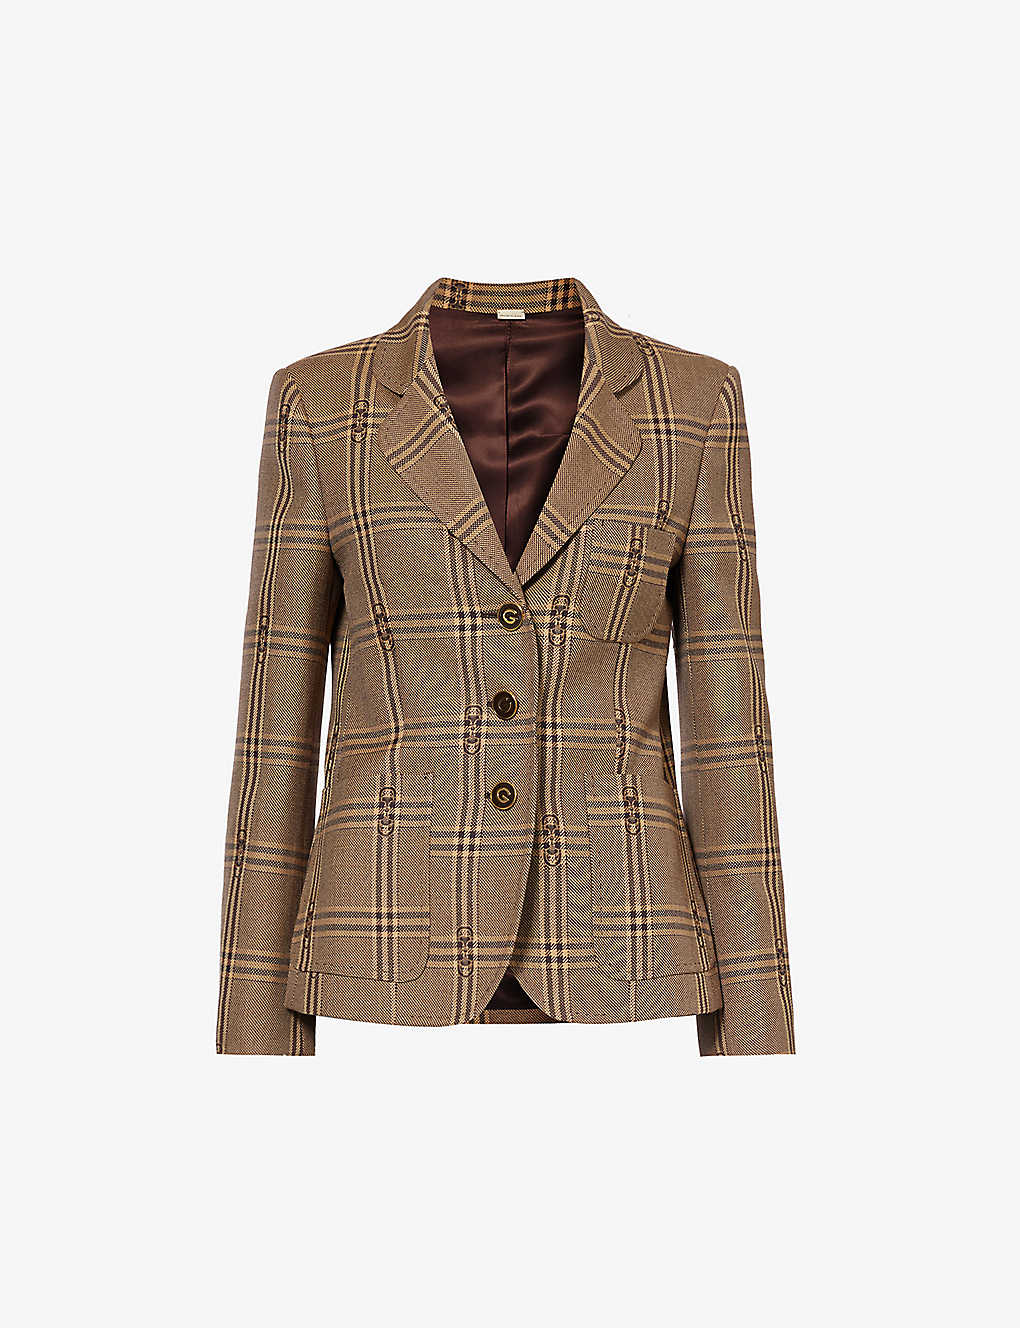 Gucci Womens Beige Brown Single-breasted Checked Wool Blazer